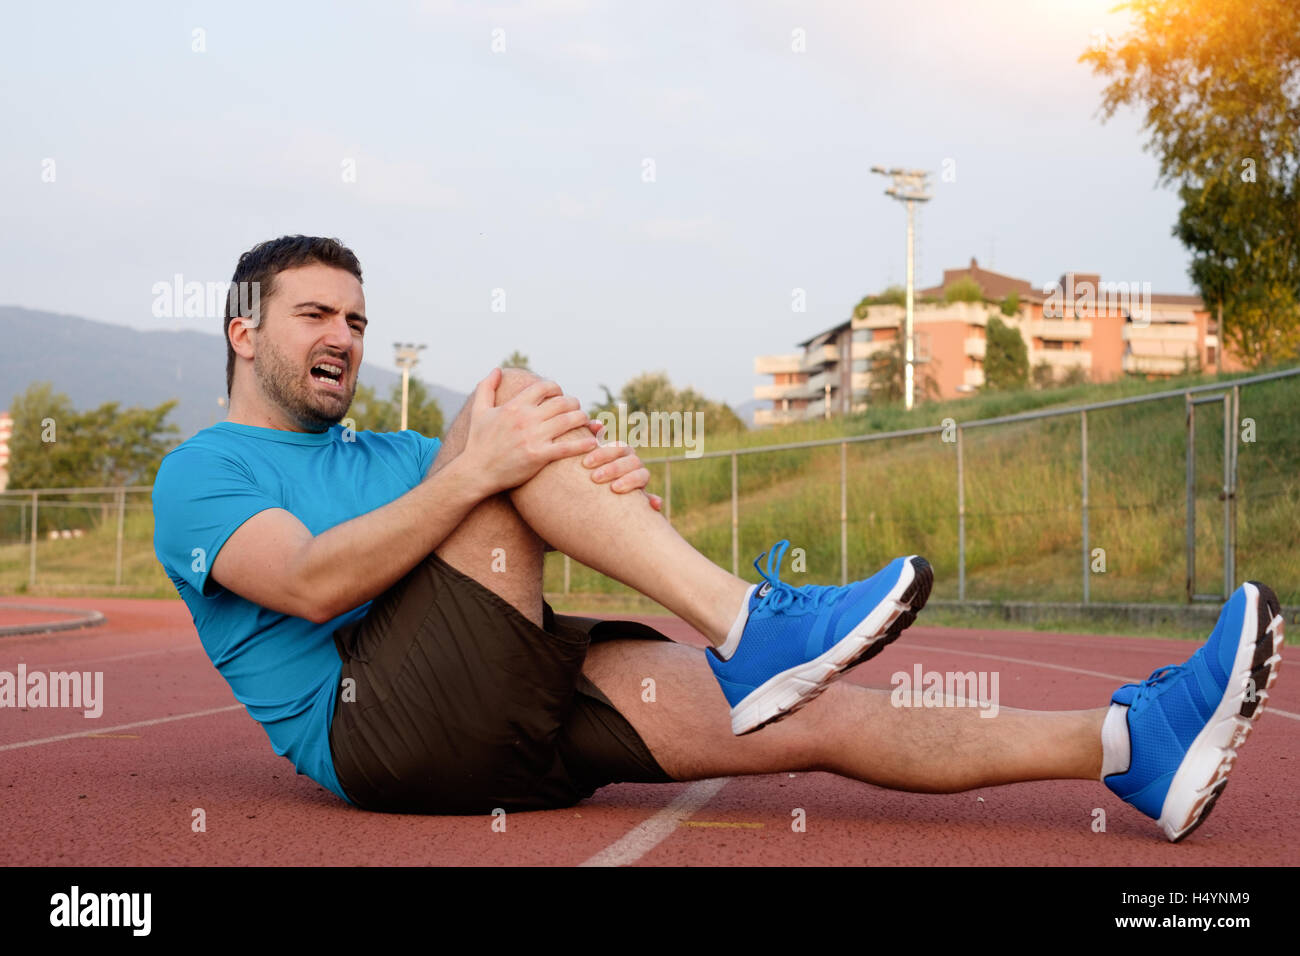 Runner with injured knee on the track Stock Photo